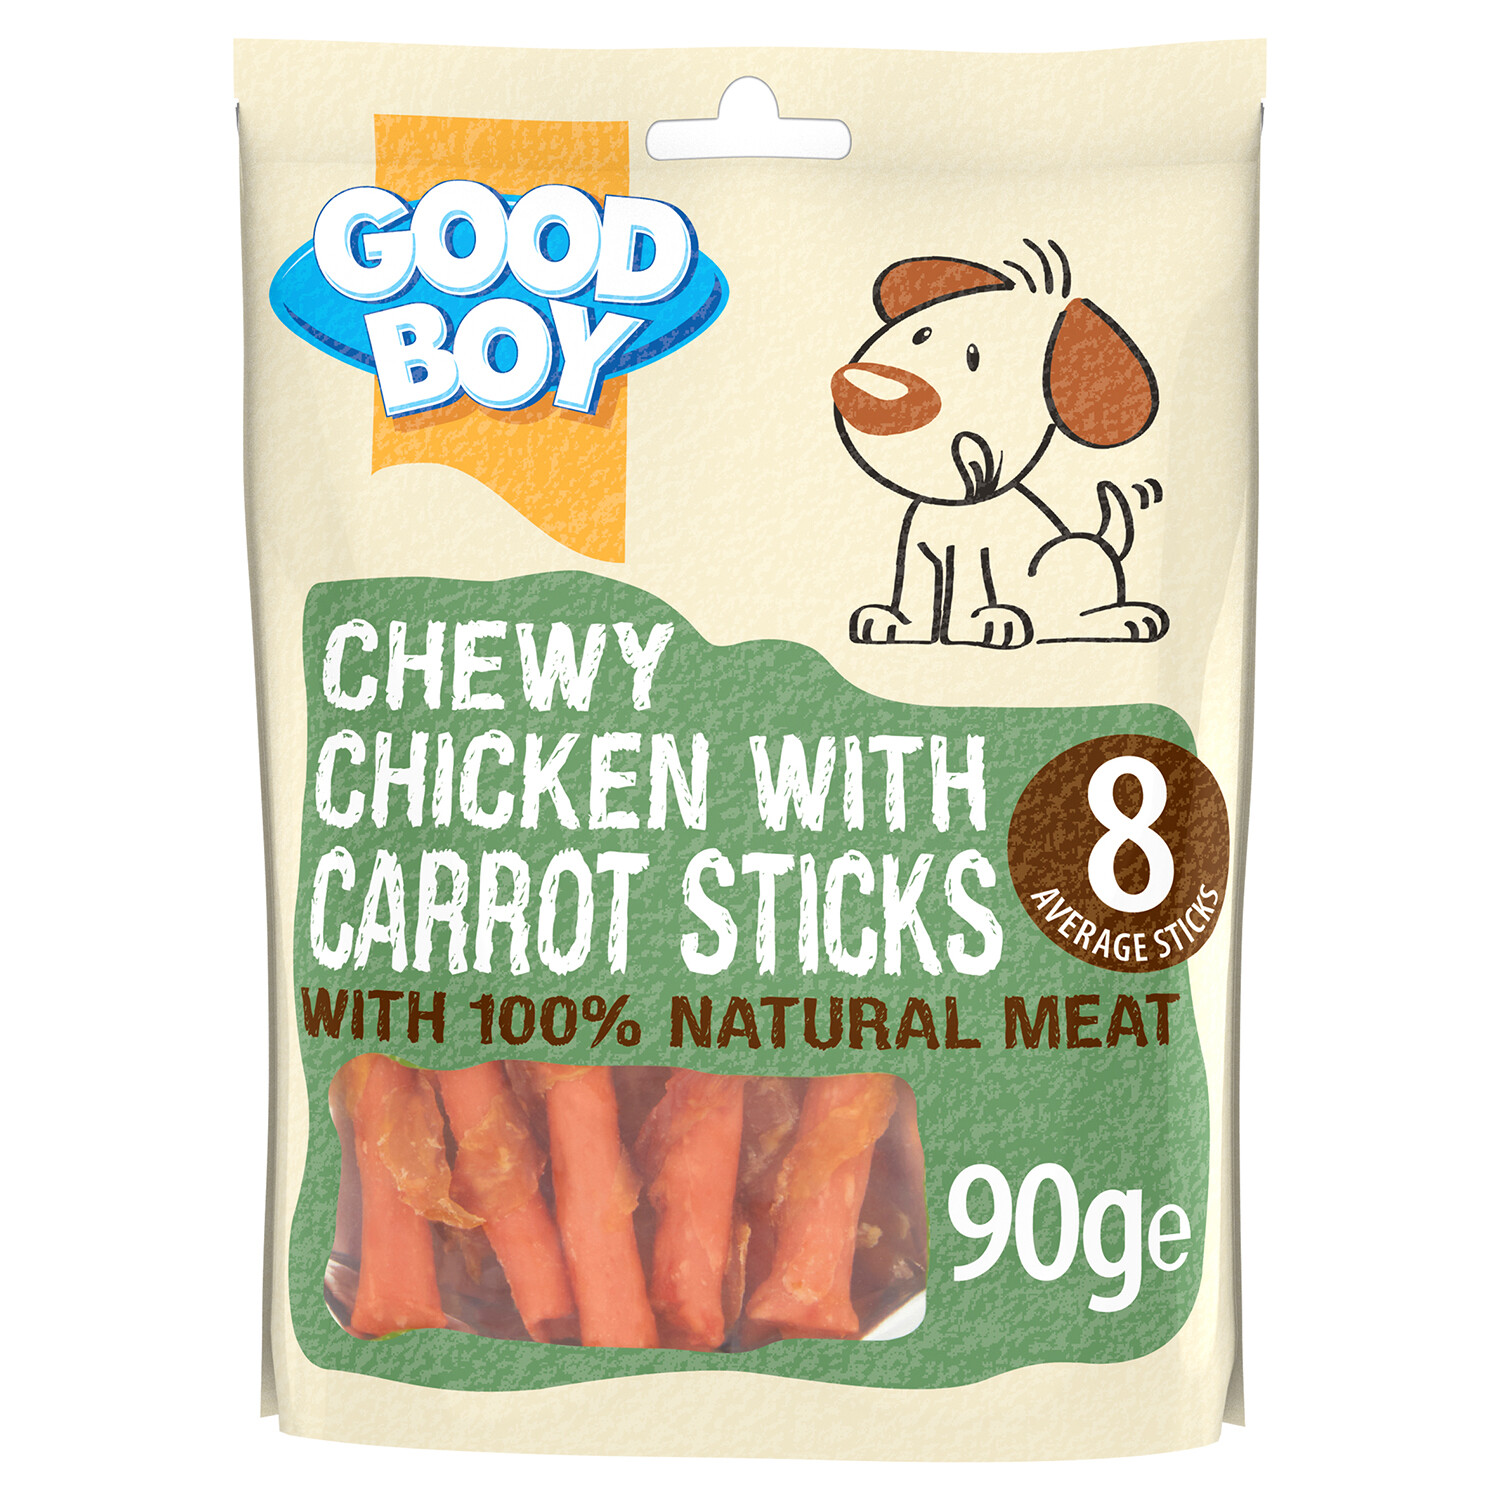 Good Boy Chicken with Carrot Chewy Stick 90g 8 Pack Image 1